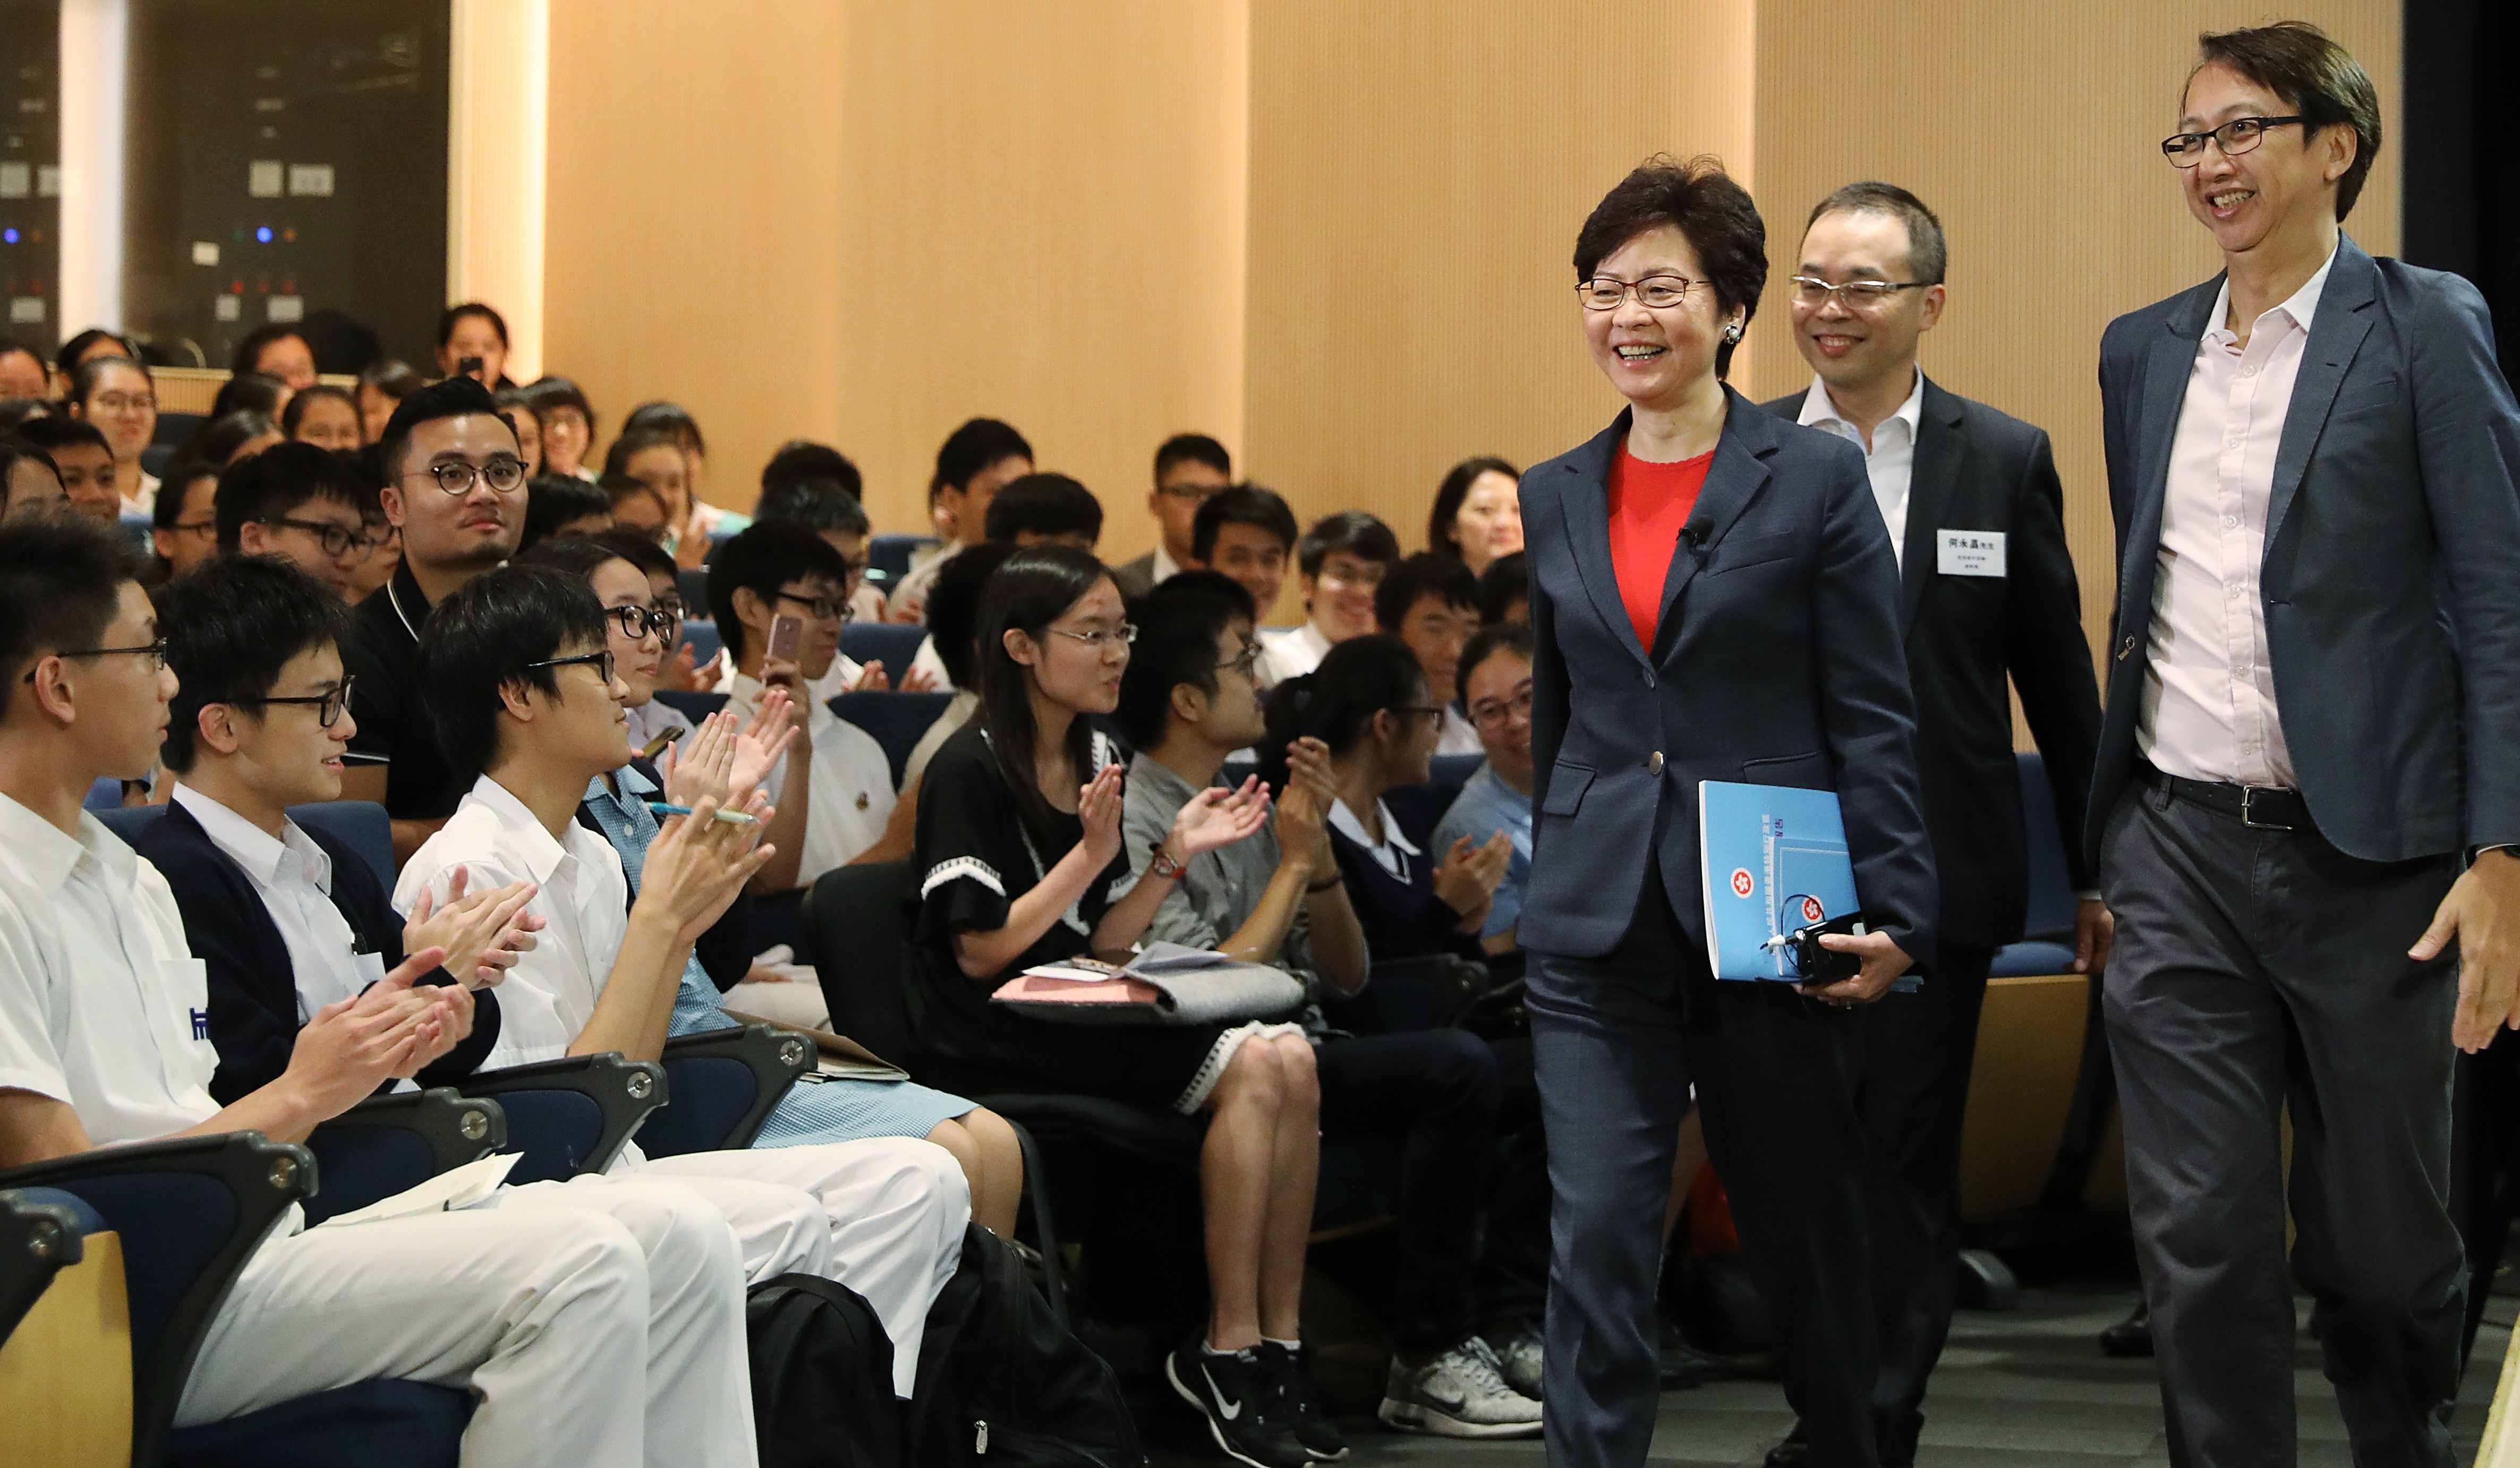 Chief Executive Carrie Lam arrives for a discussion with students about policy address initiatives, at the Federation of Youth Groups Jockey Club Media 21 venue in Aberdeen, on October 16. Photo: Sam Tsang